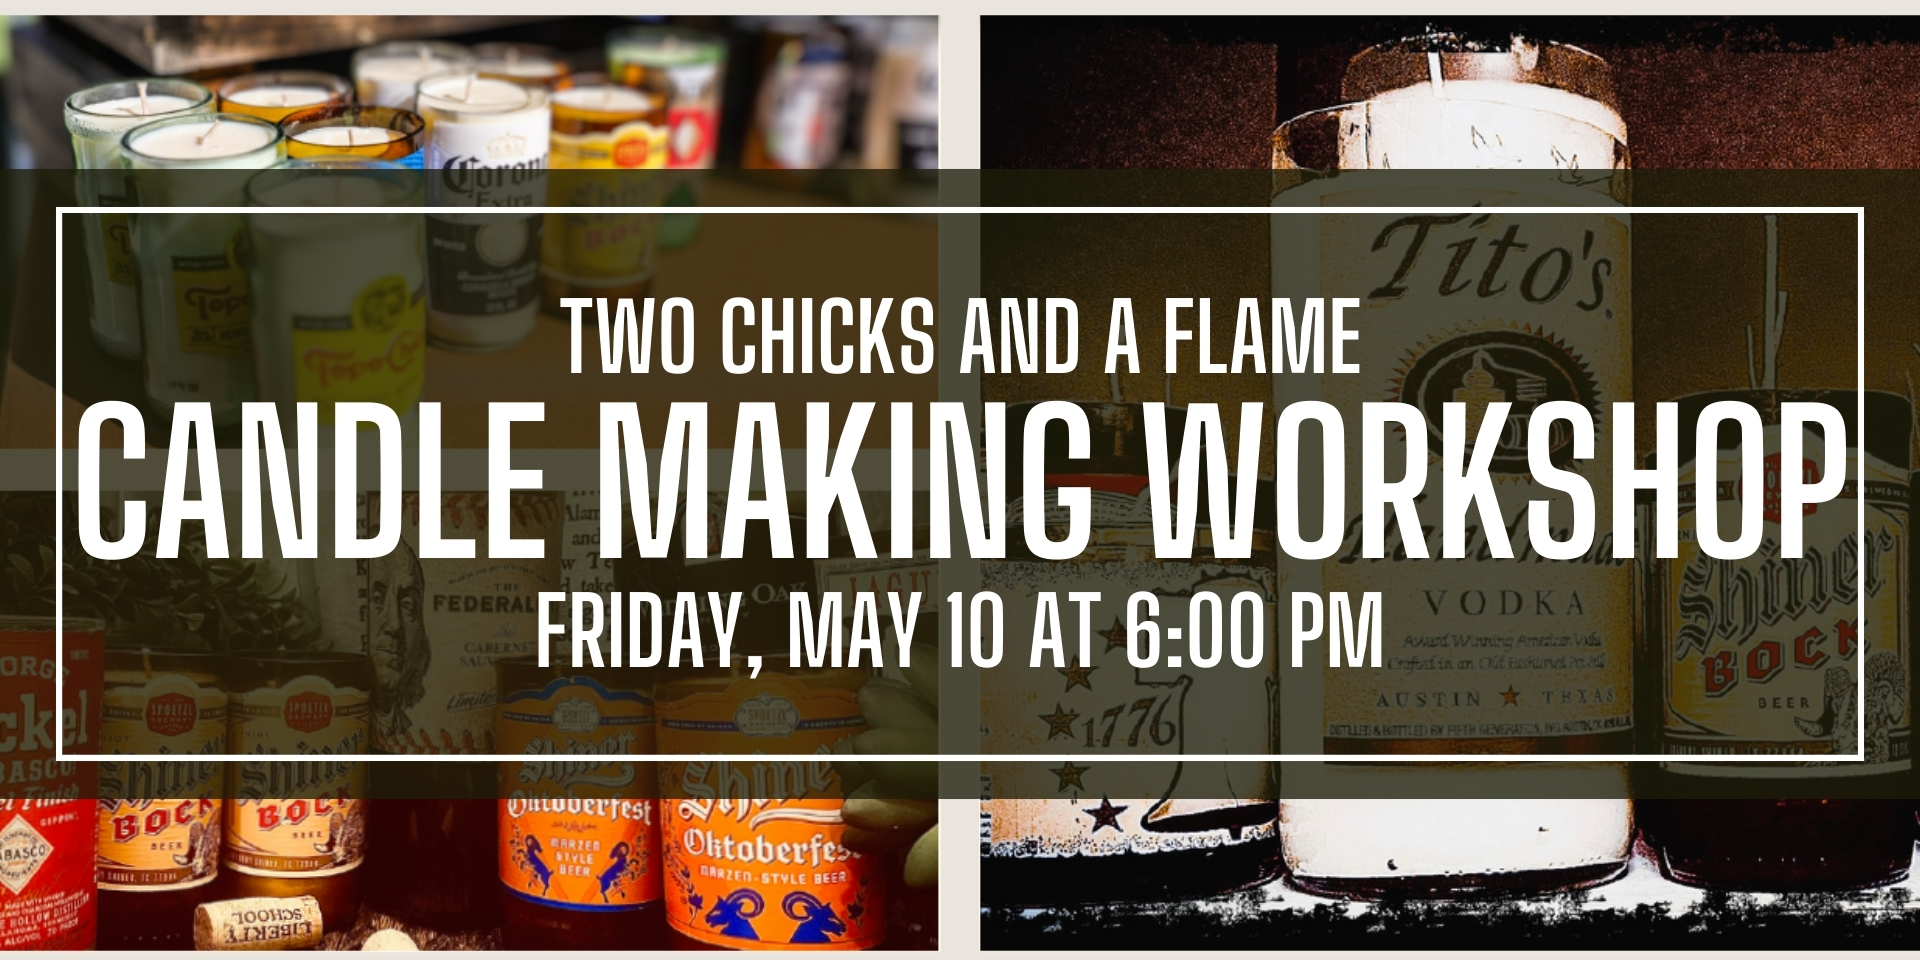 Candle Making Workshop with Two Chicks and a Flame